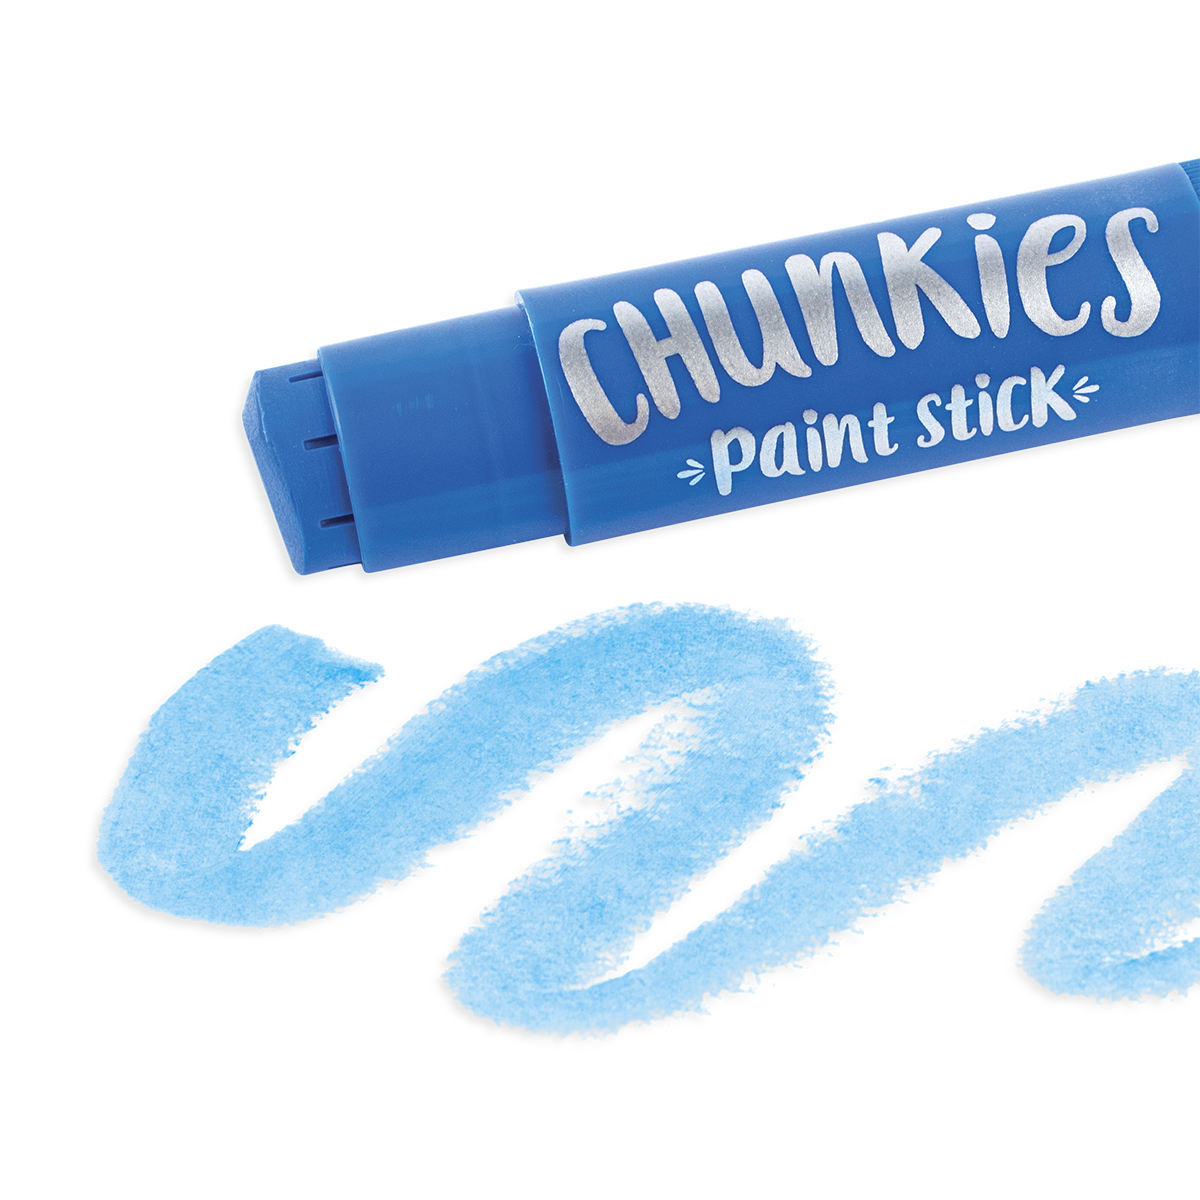 Ooly Chunkies Paint Sticks Metallic- Set of 6 - Bibs and Kids Boutique